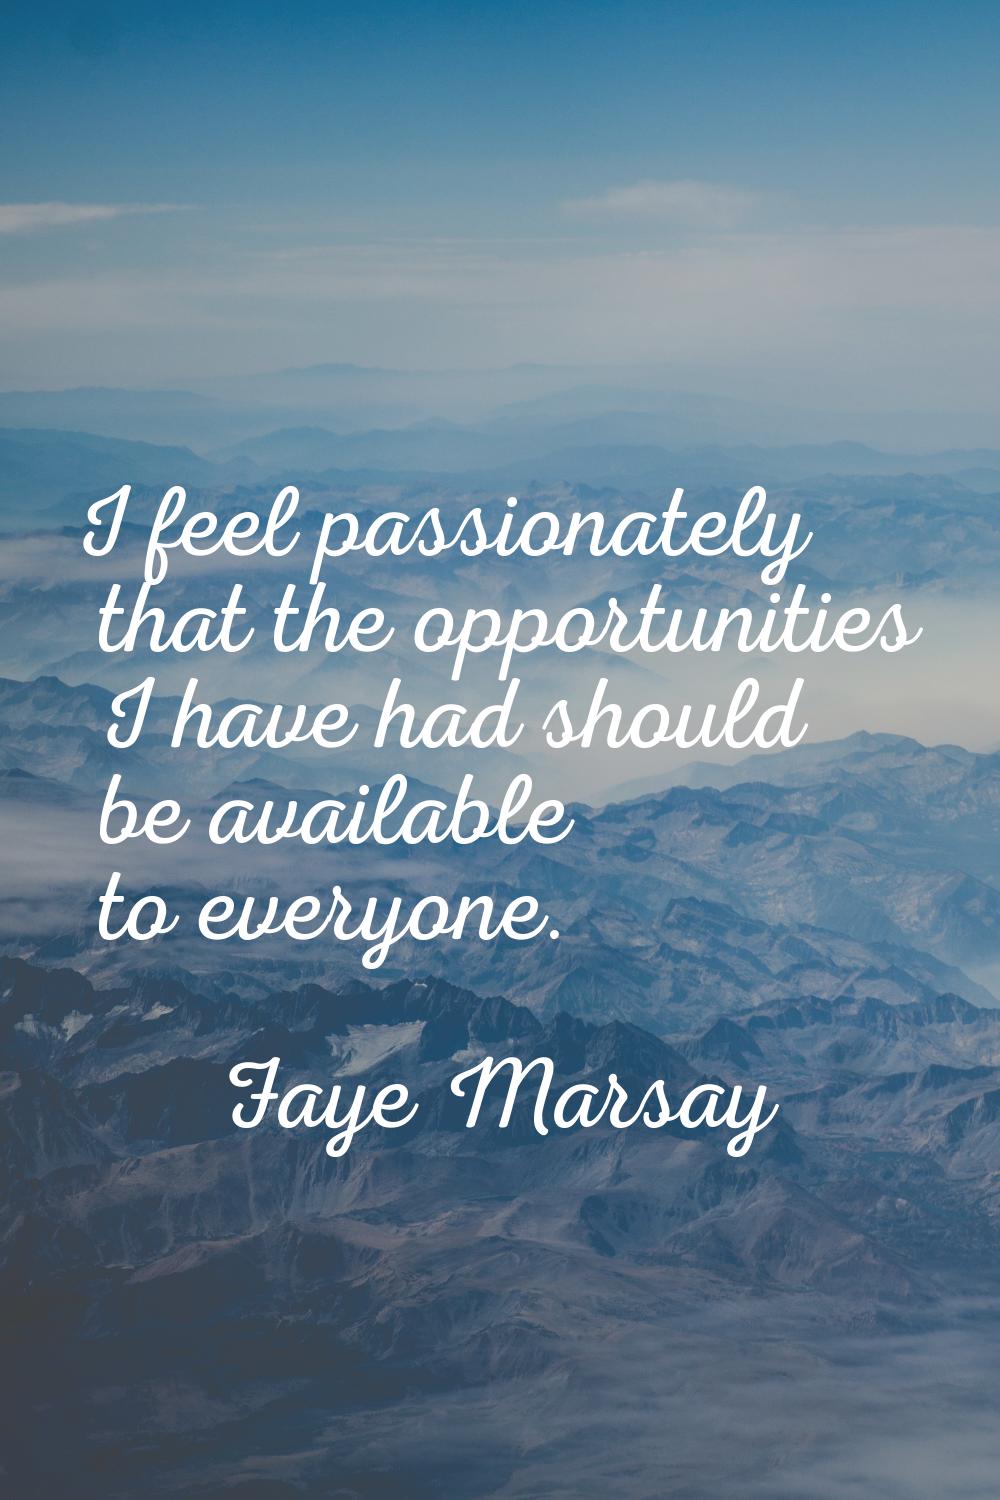 I feel passionately that the opportunities I have had should be available to everyone.